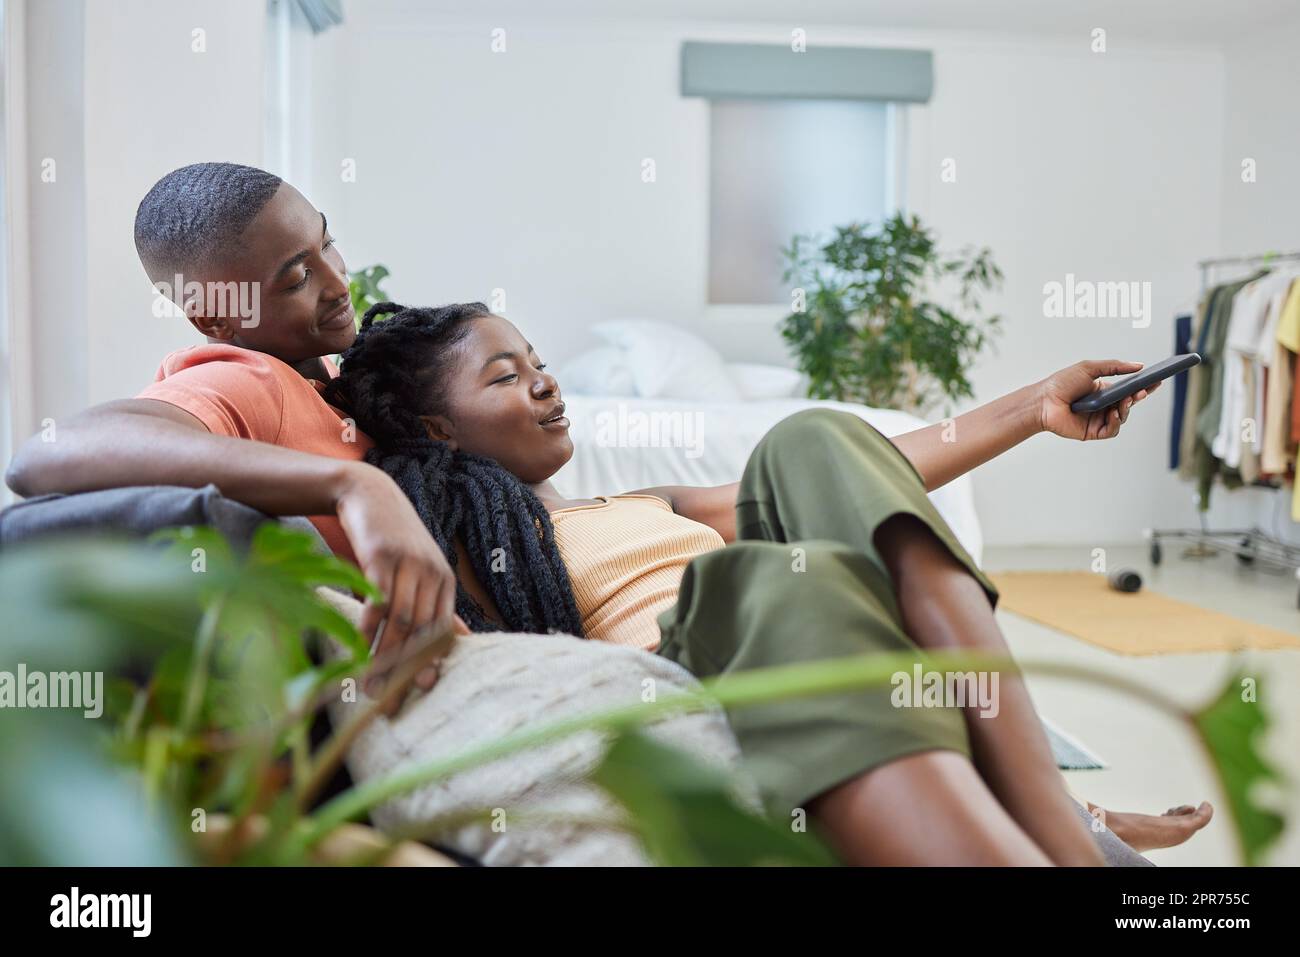 Young african american couple changing channels on remote and watching television together on sofa at home. Girlfriend relaxing on boyfriends lap while enjoying entertainment shows, series and movies Stock Photo